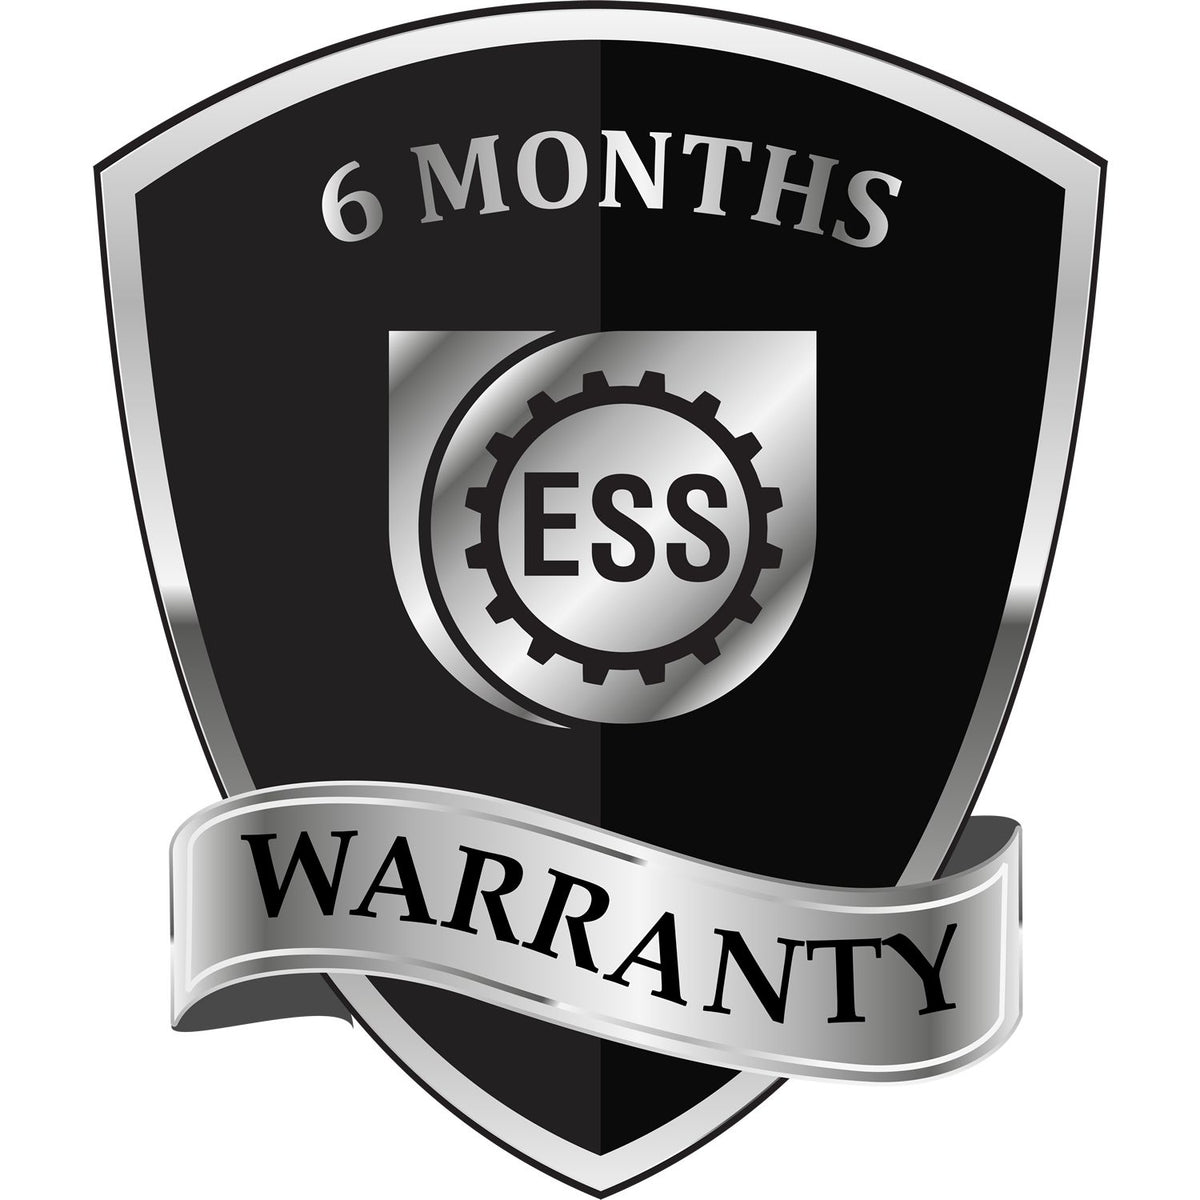 A badge or emblem showing a warranty icon for the Self-Inking Connecticut PE Stamp